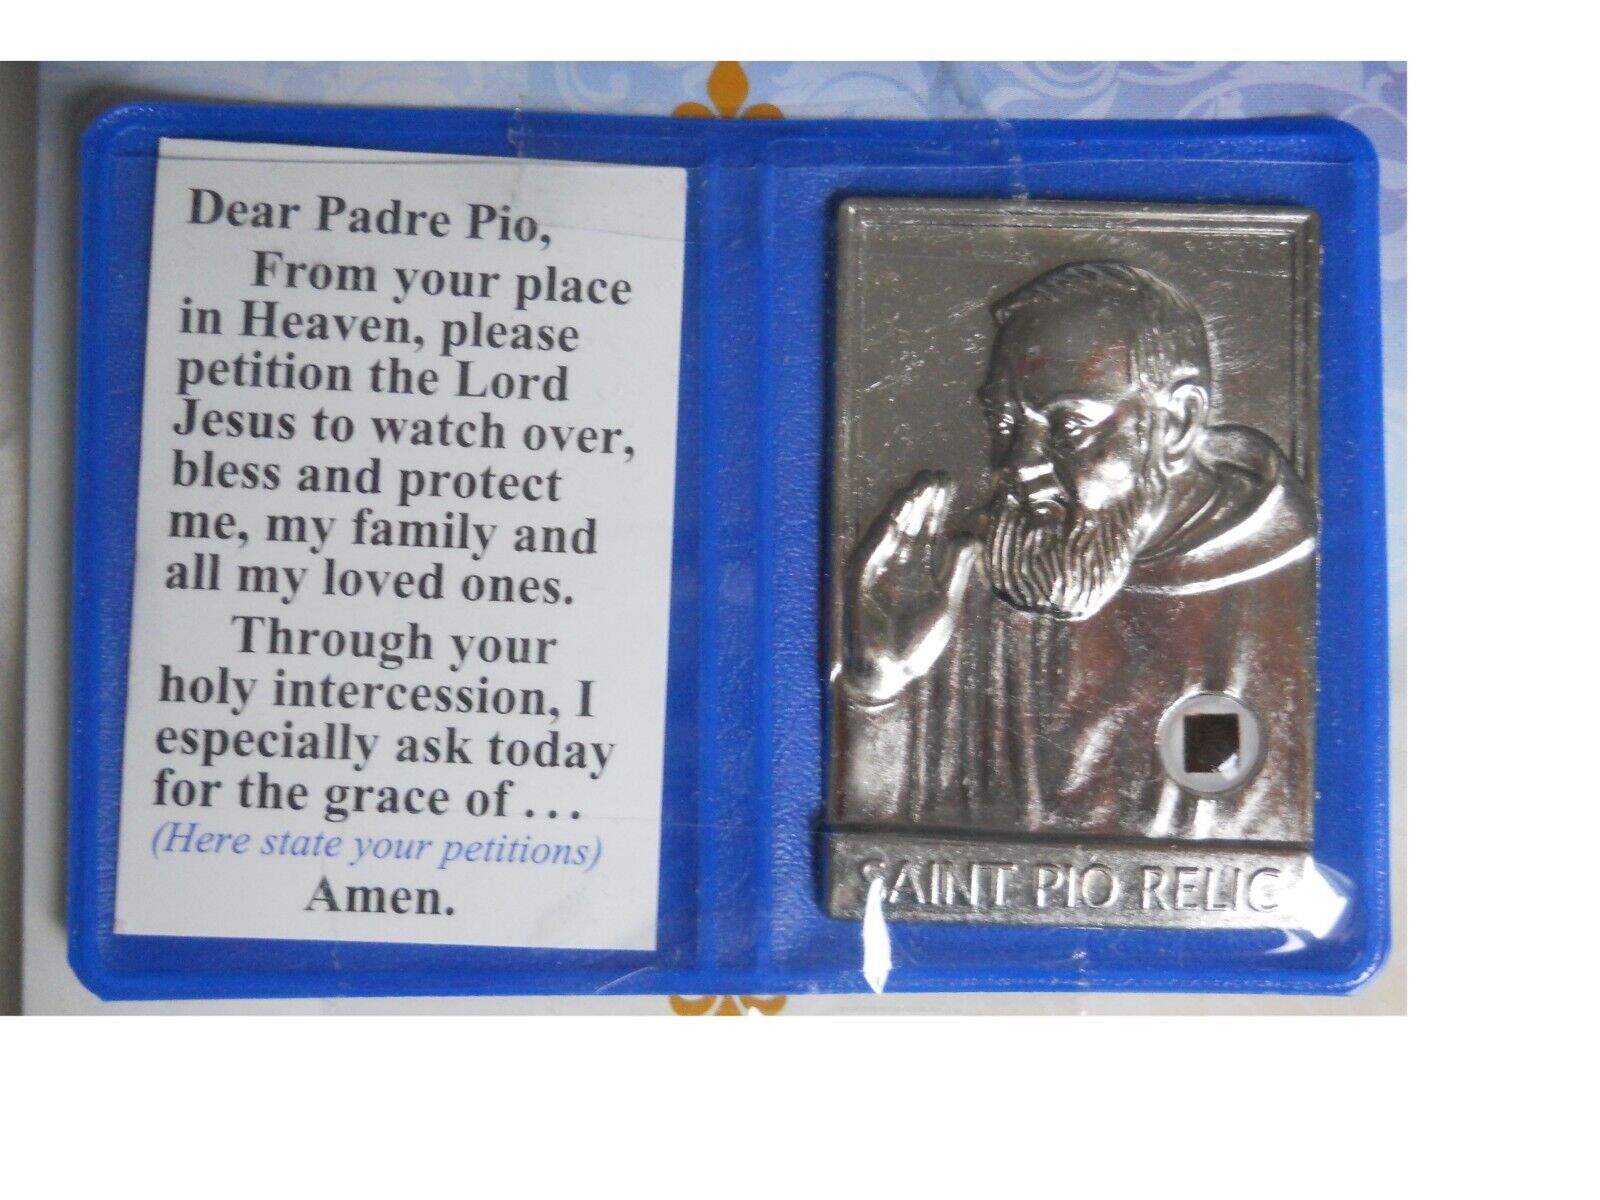 St. padre pio medal FREE S/H relic NEW medal saint of pietrelcina